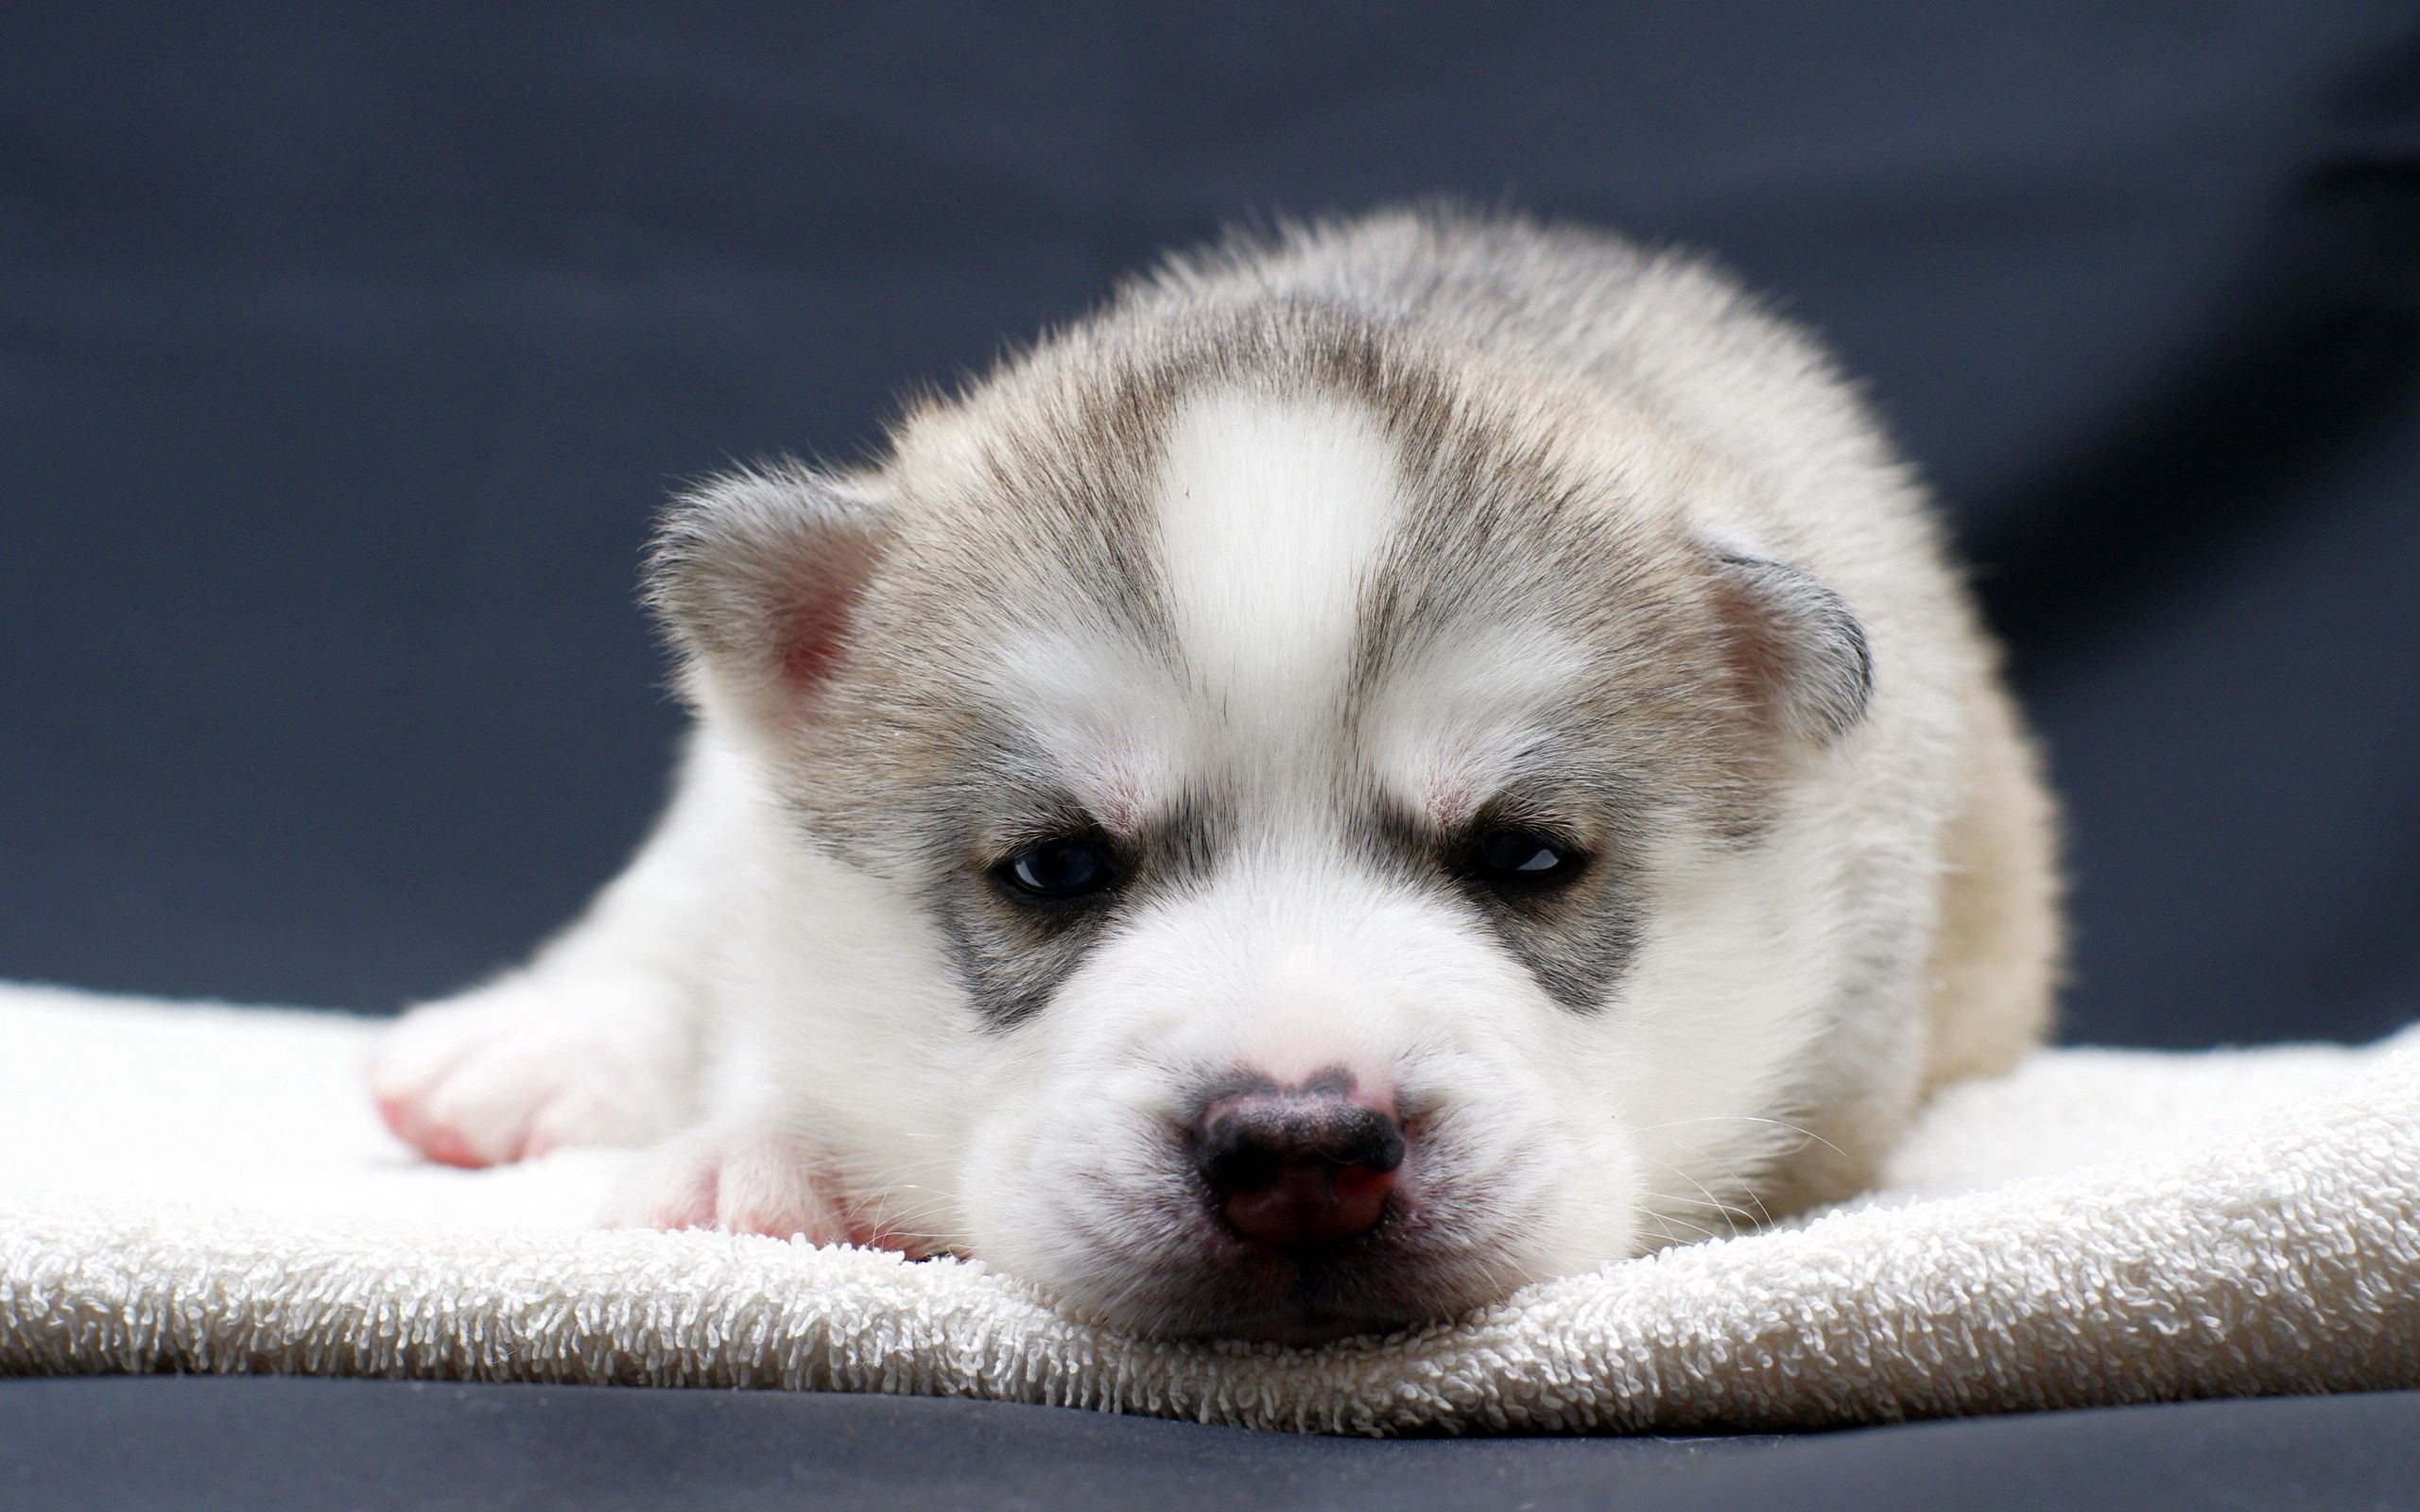 Husky mobile wallpaper, Spotting the cuteness, Angry and spotty, Free download, 2560x1600 HD Desktop